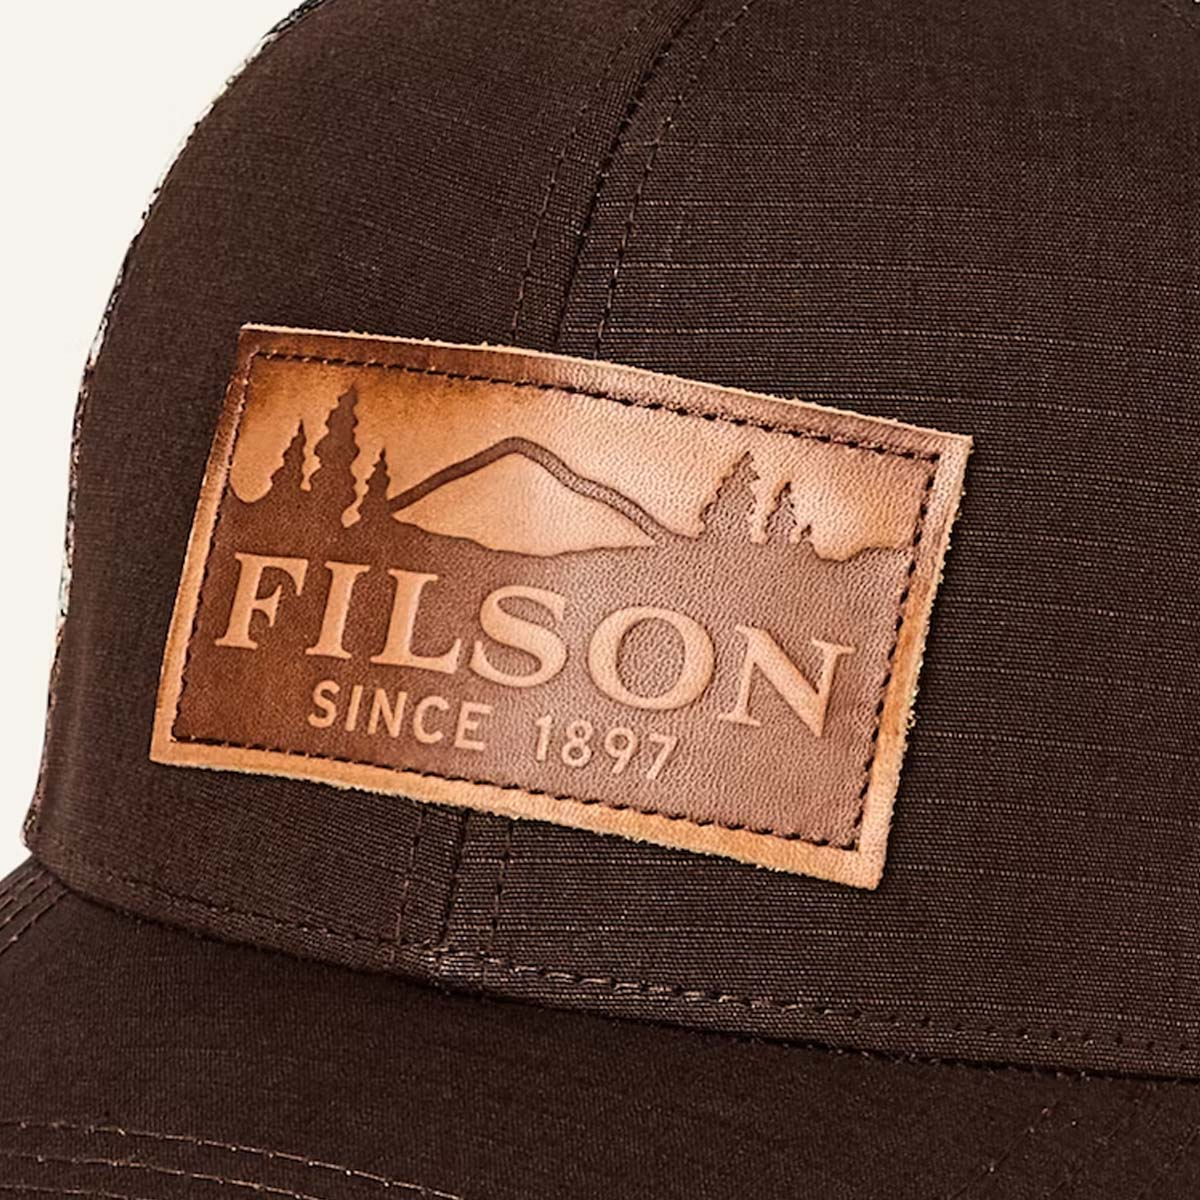 Filson Logger Mesh Cap Brown Camo/Scenic, Made with 100% cotton ripstop and breathable polyester mesh